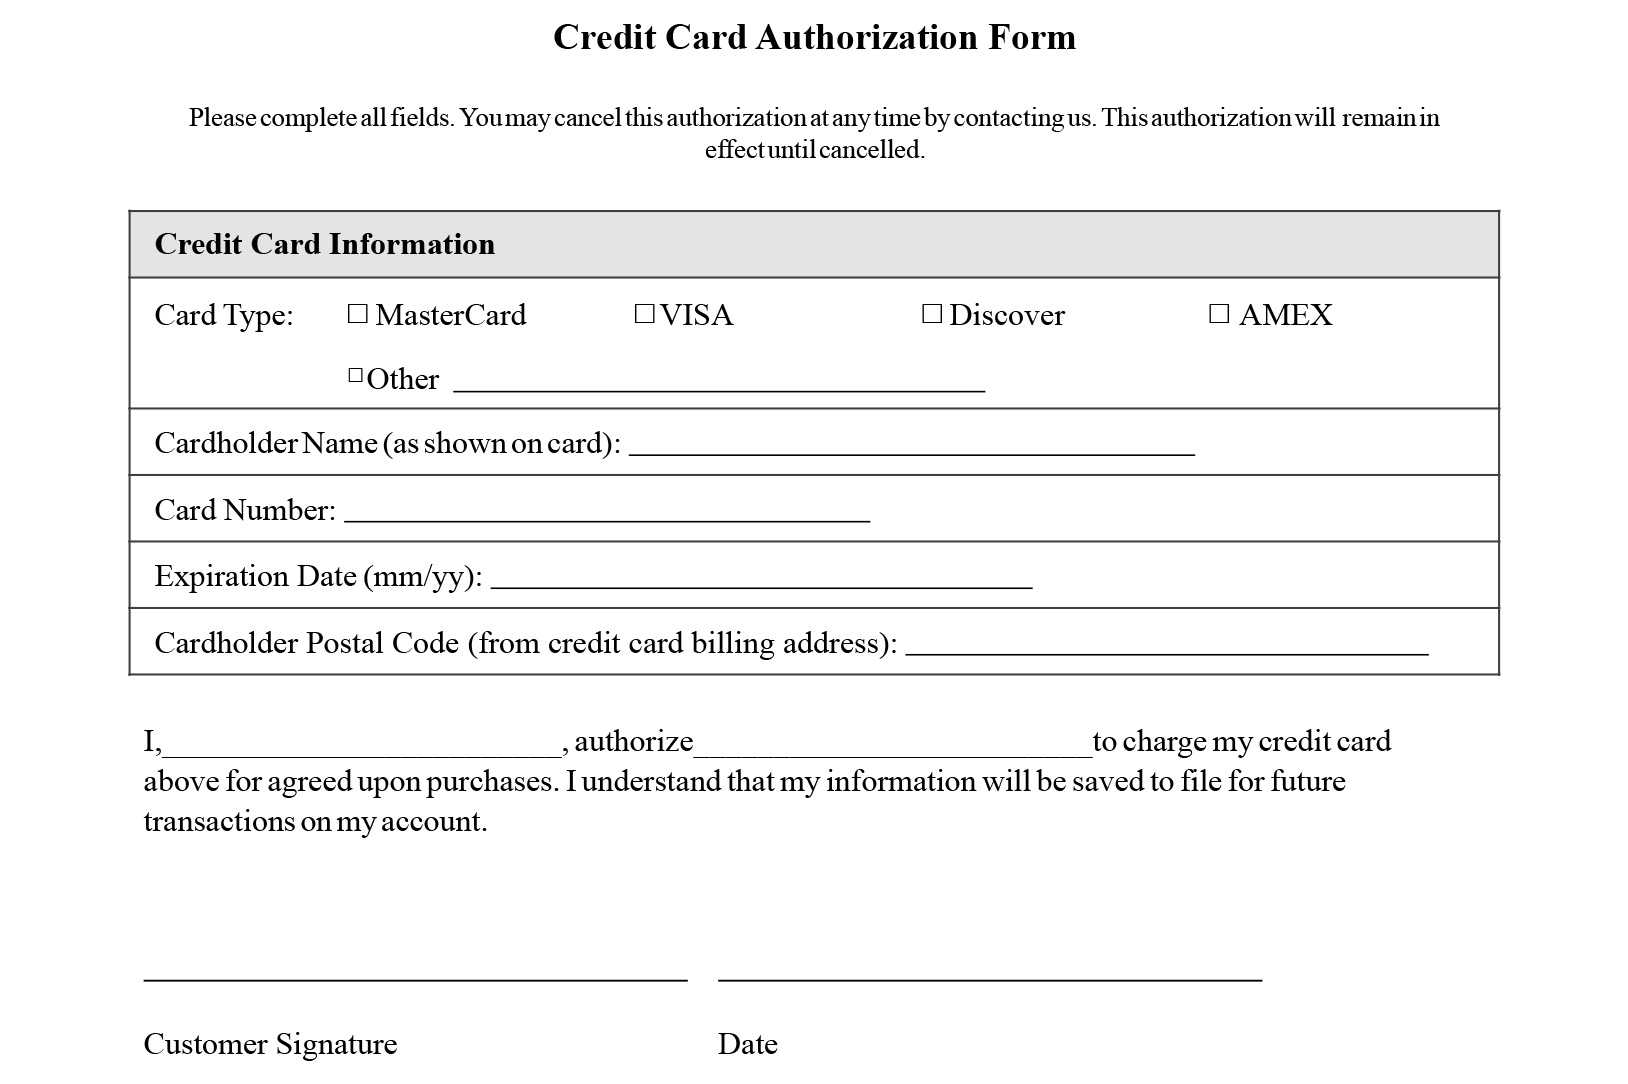 Credit Card Authorization Form Templates [Download] In Credit Card Authorisation Form Template Australia